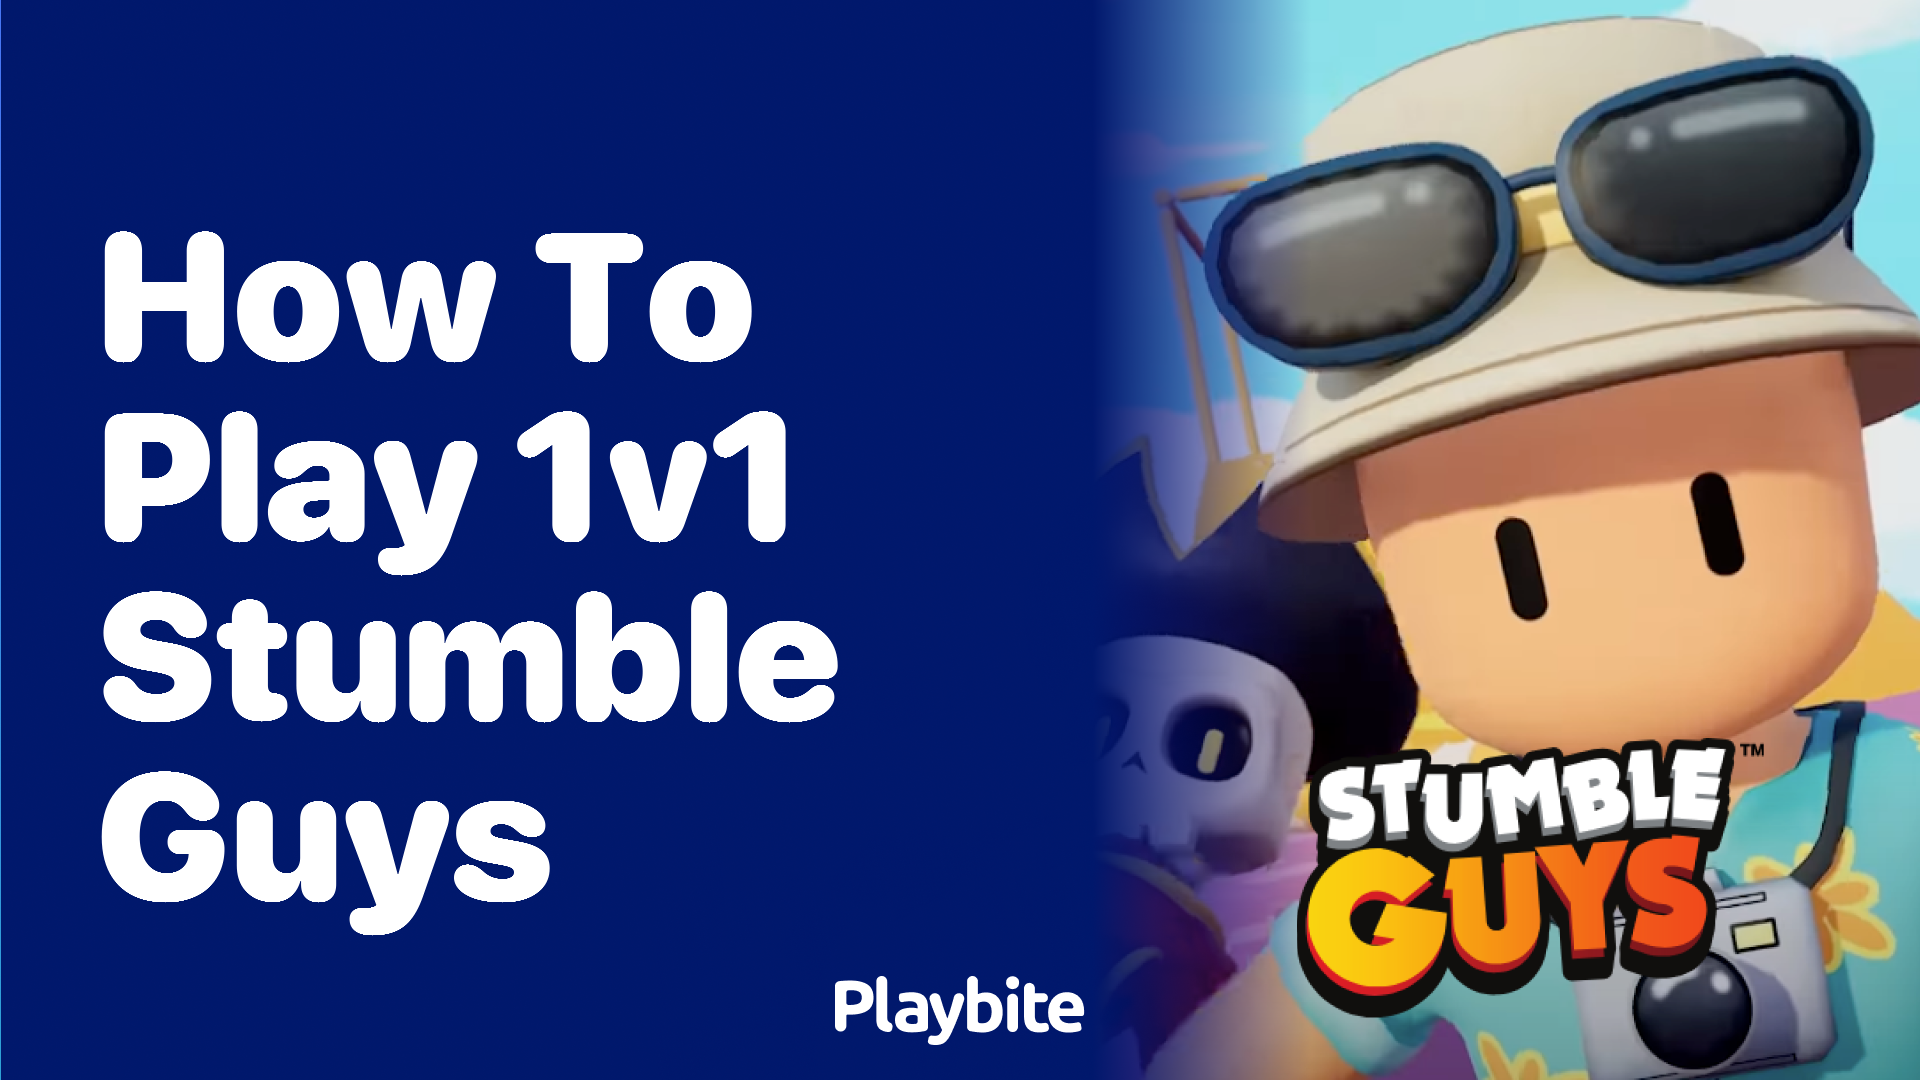 How to Play 1v1 in Stumble Guys